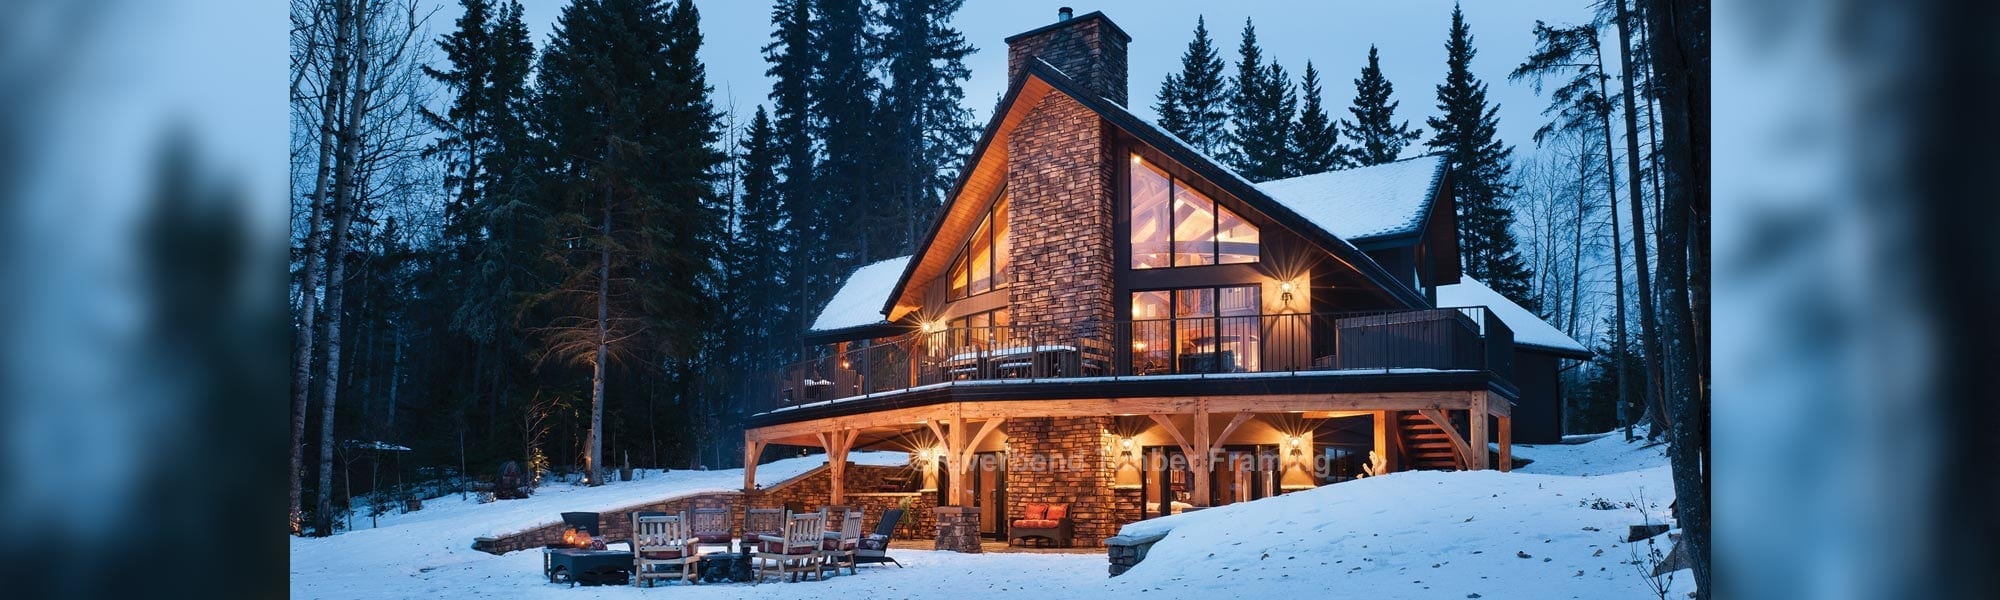 timber frame home with second floor outdoor deck in the winter